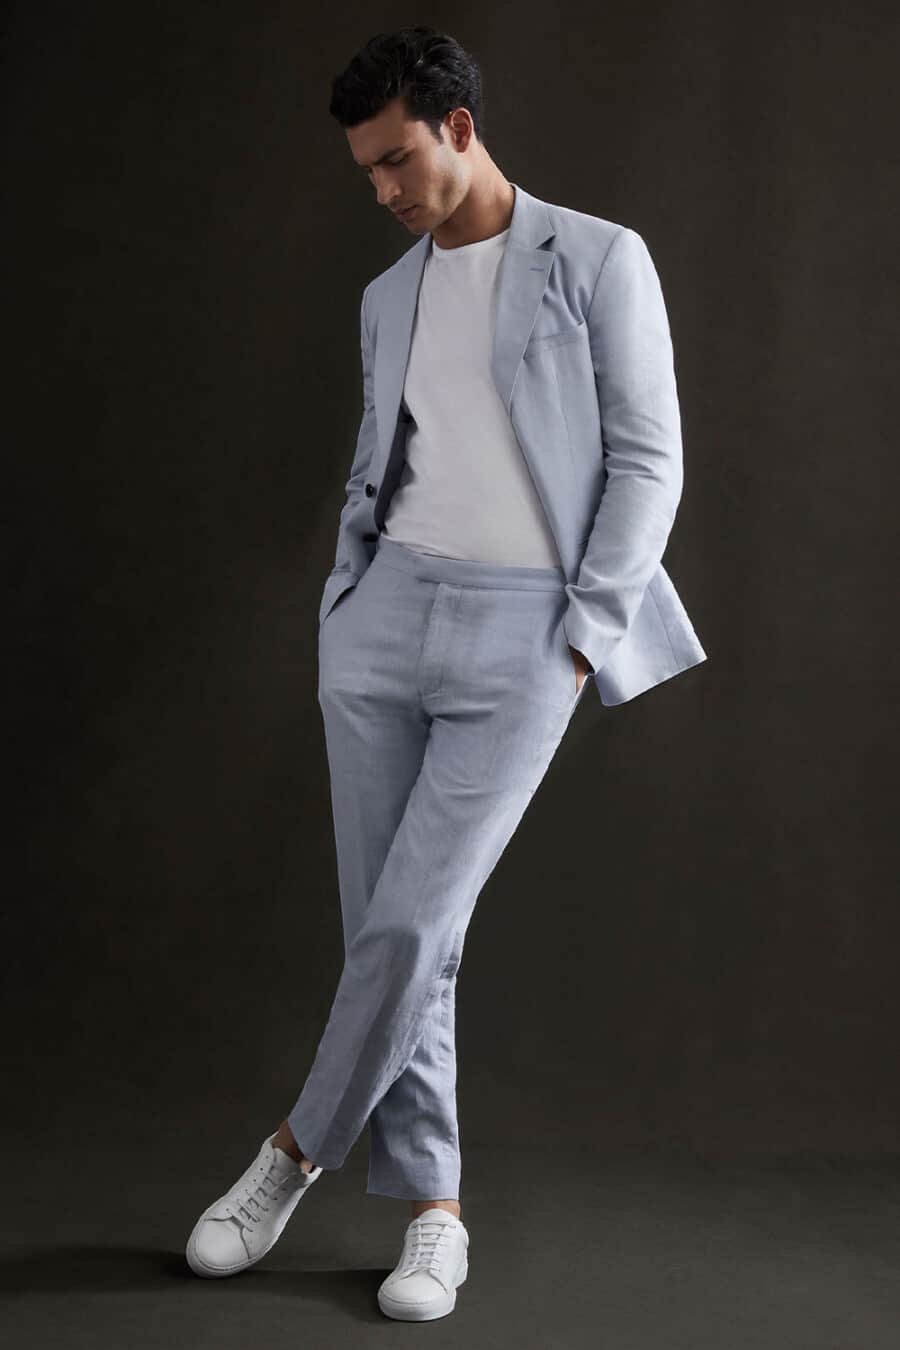 Men's light blue suit, white T-shirt and white sneakers outfit